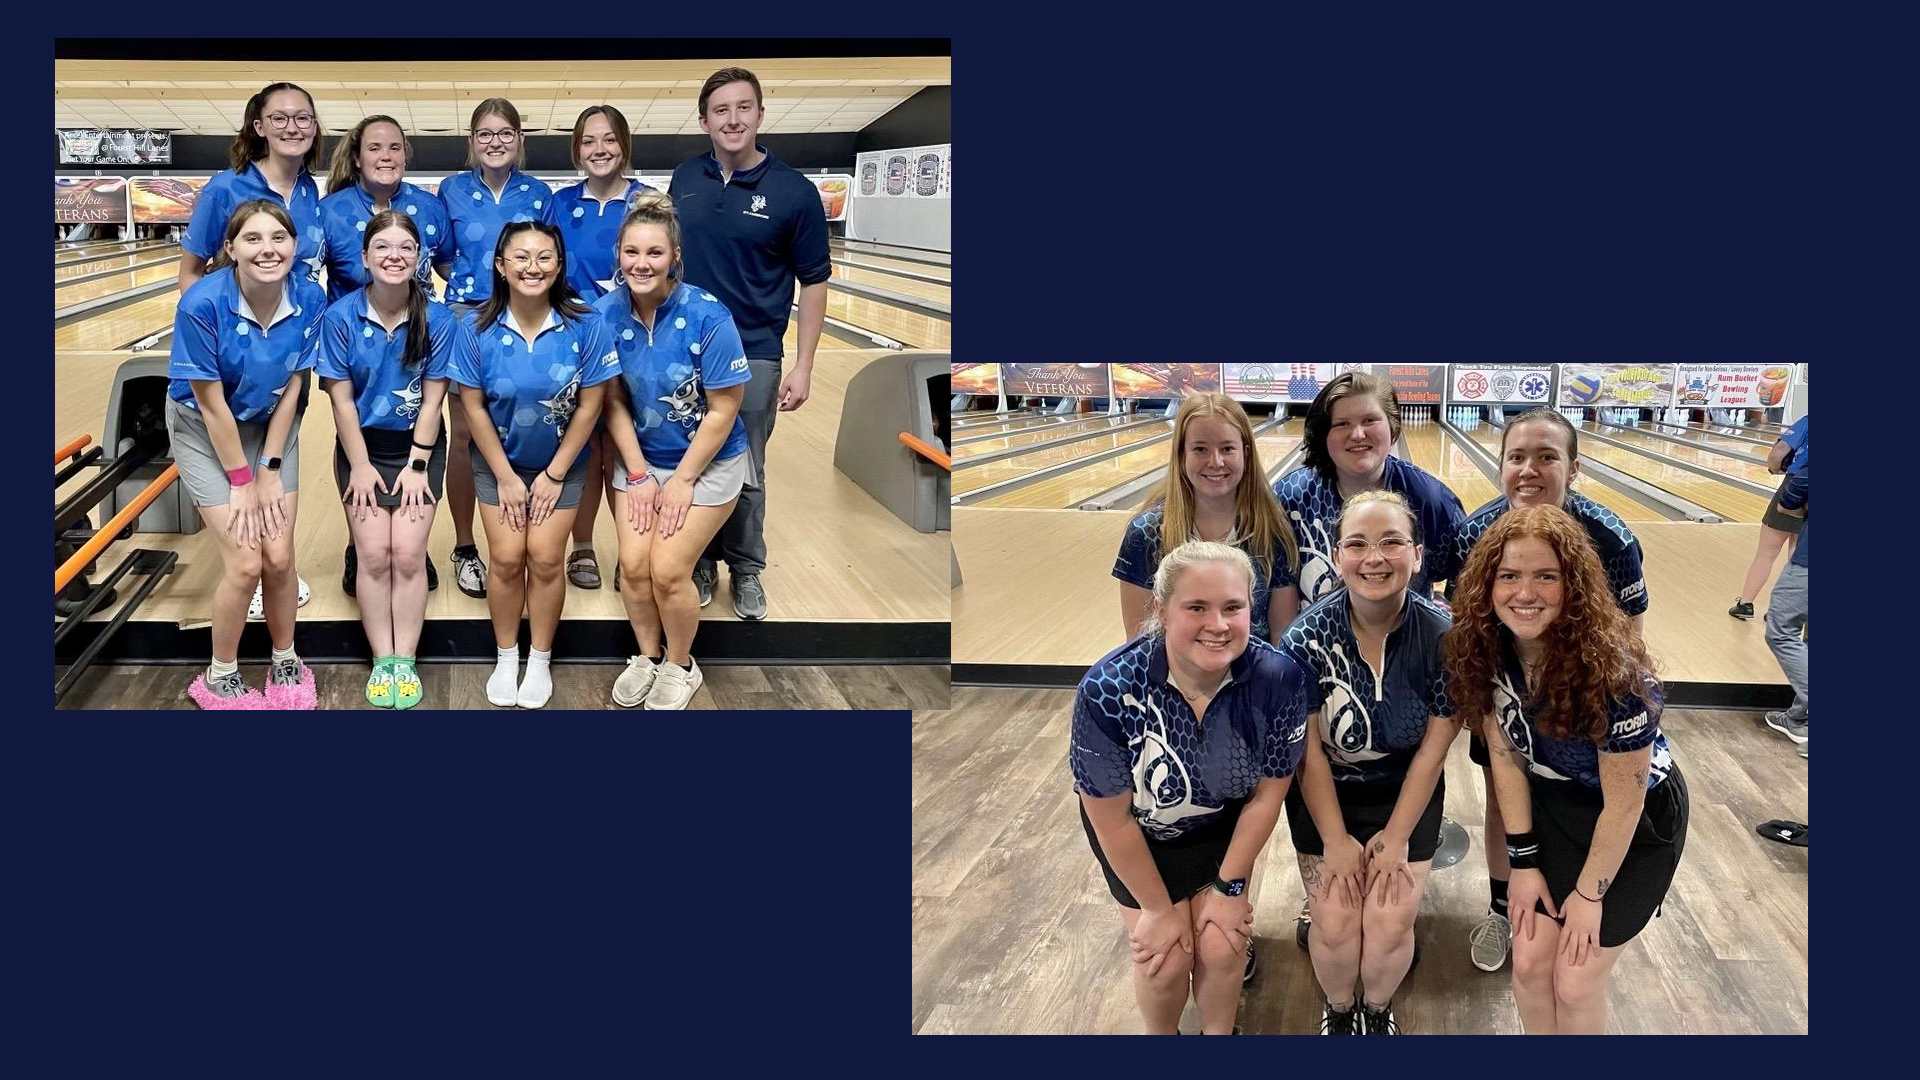 Men's and women's bowling snare runner-up finishes in season opener